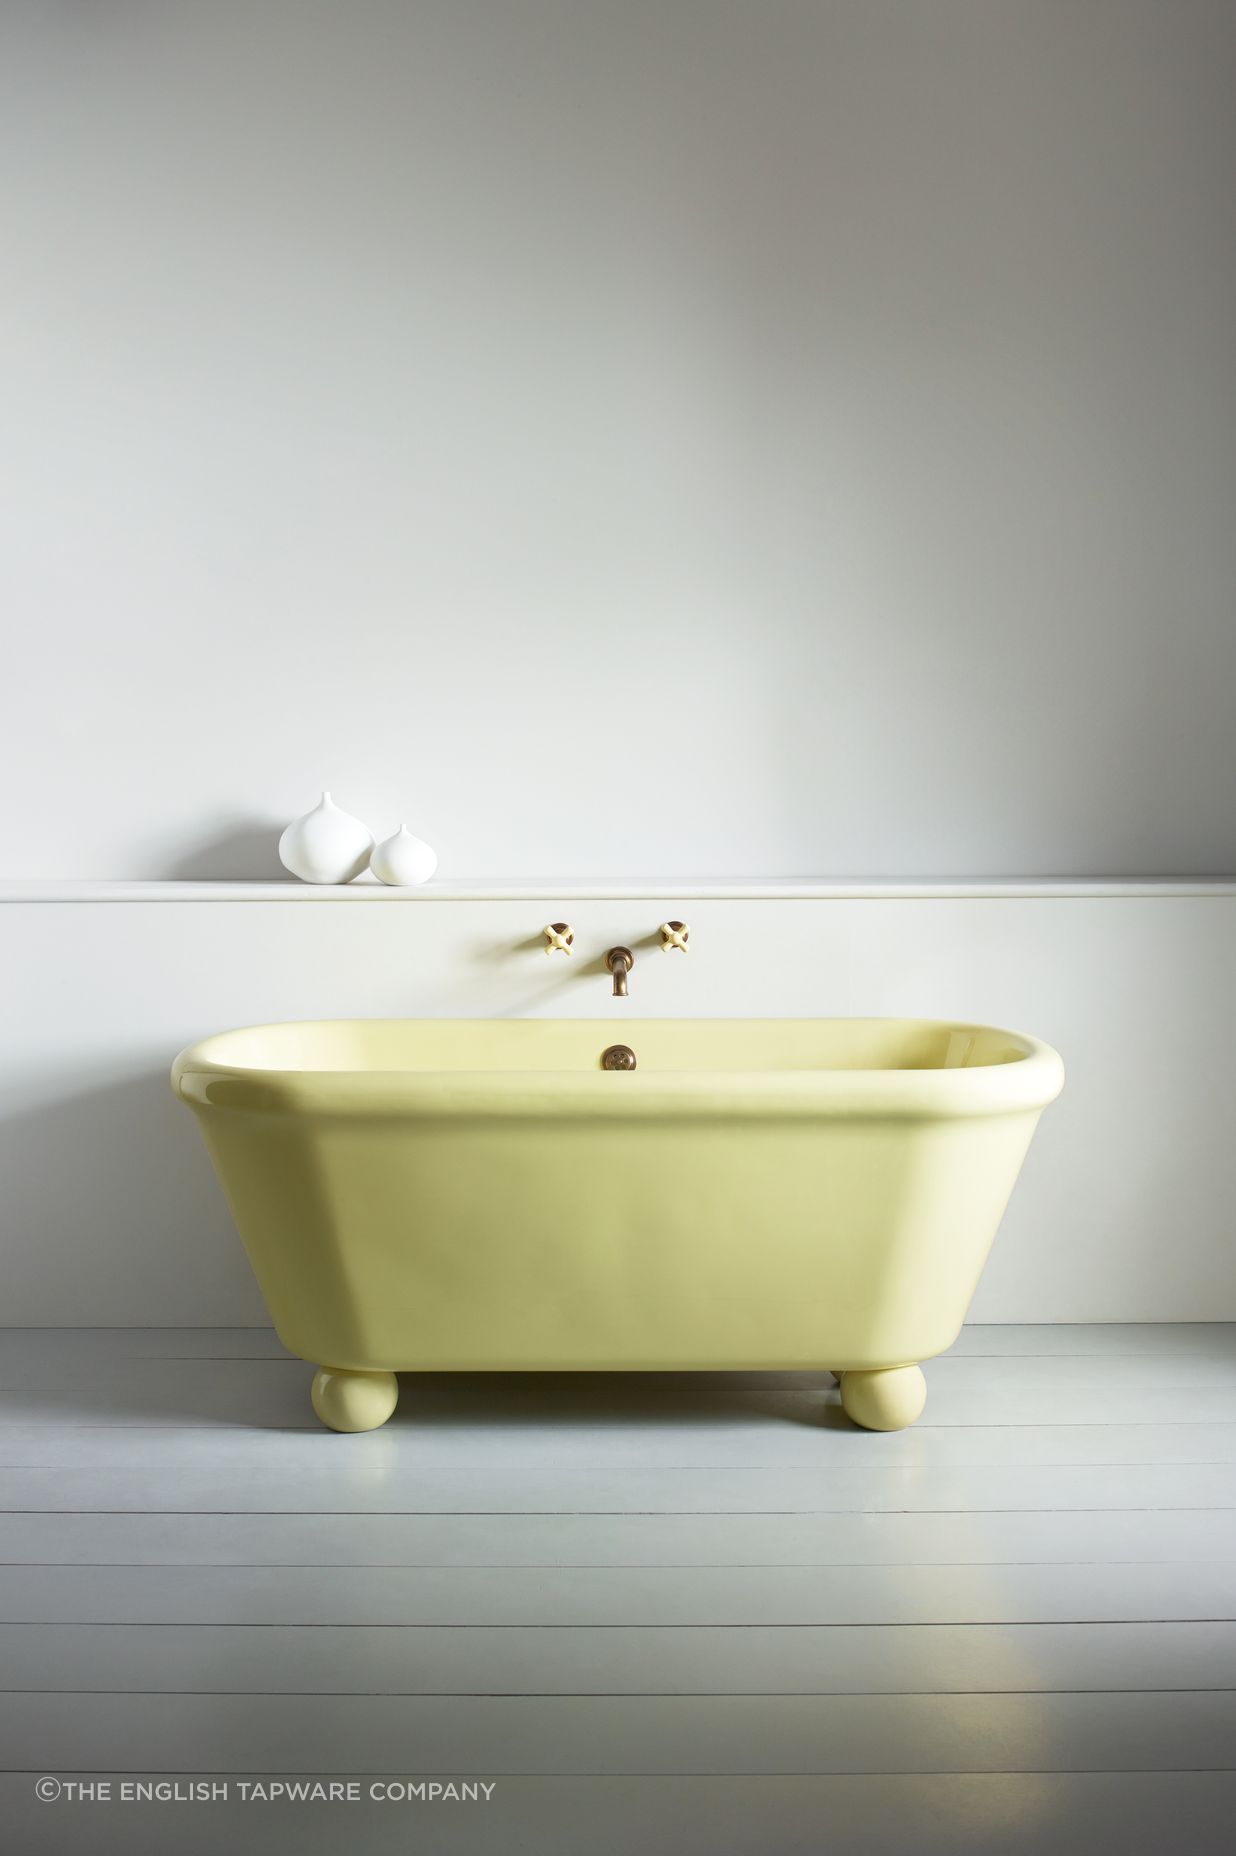 Another way to add colour to your bathroom with the Rockwell Bath